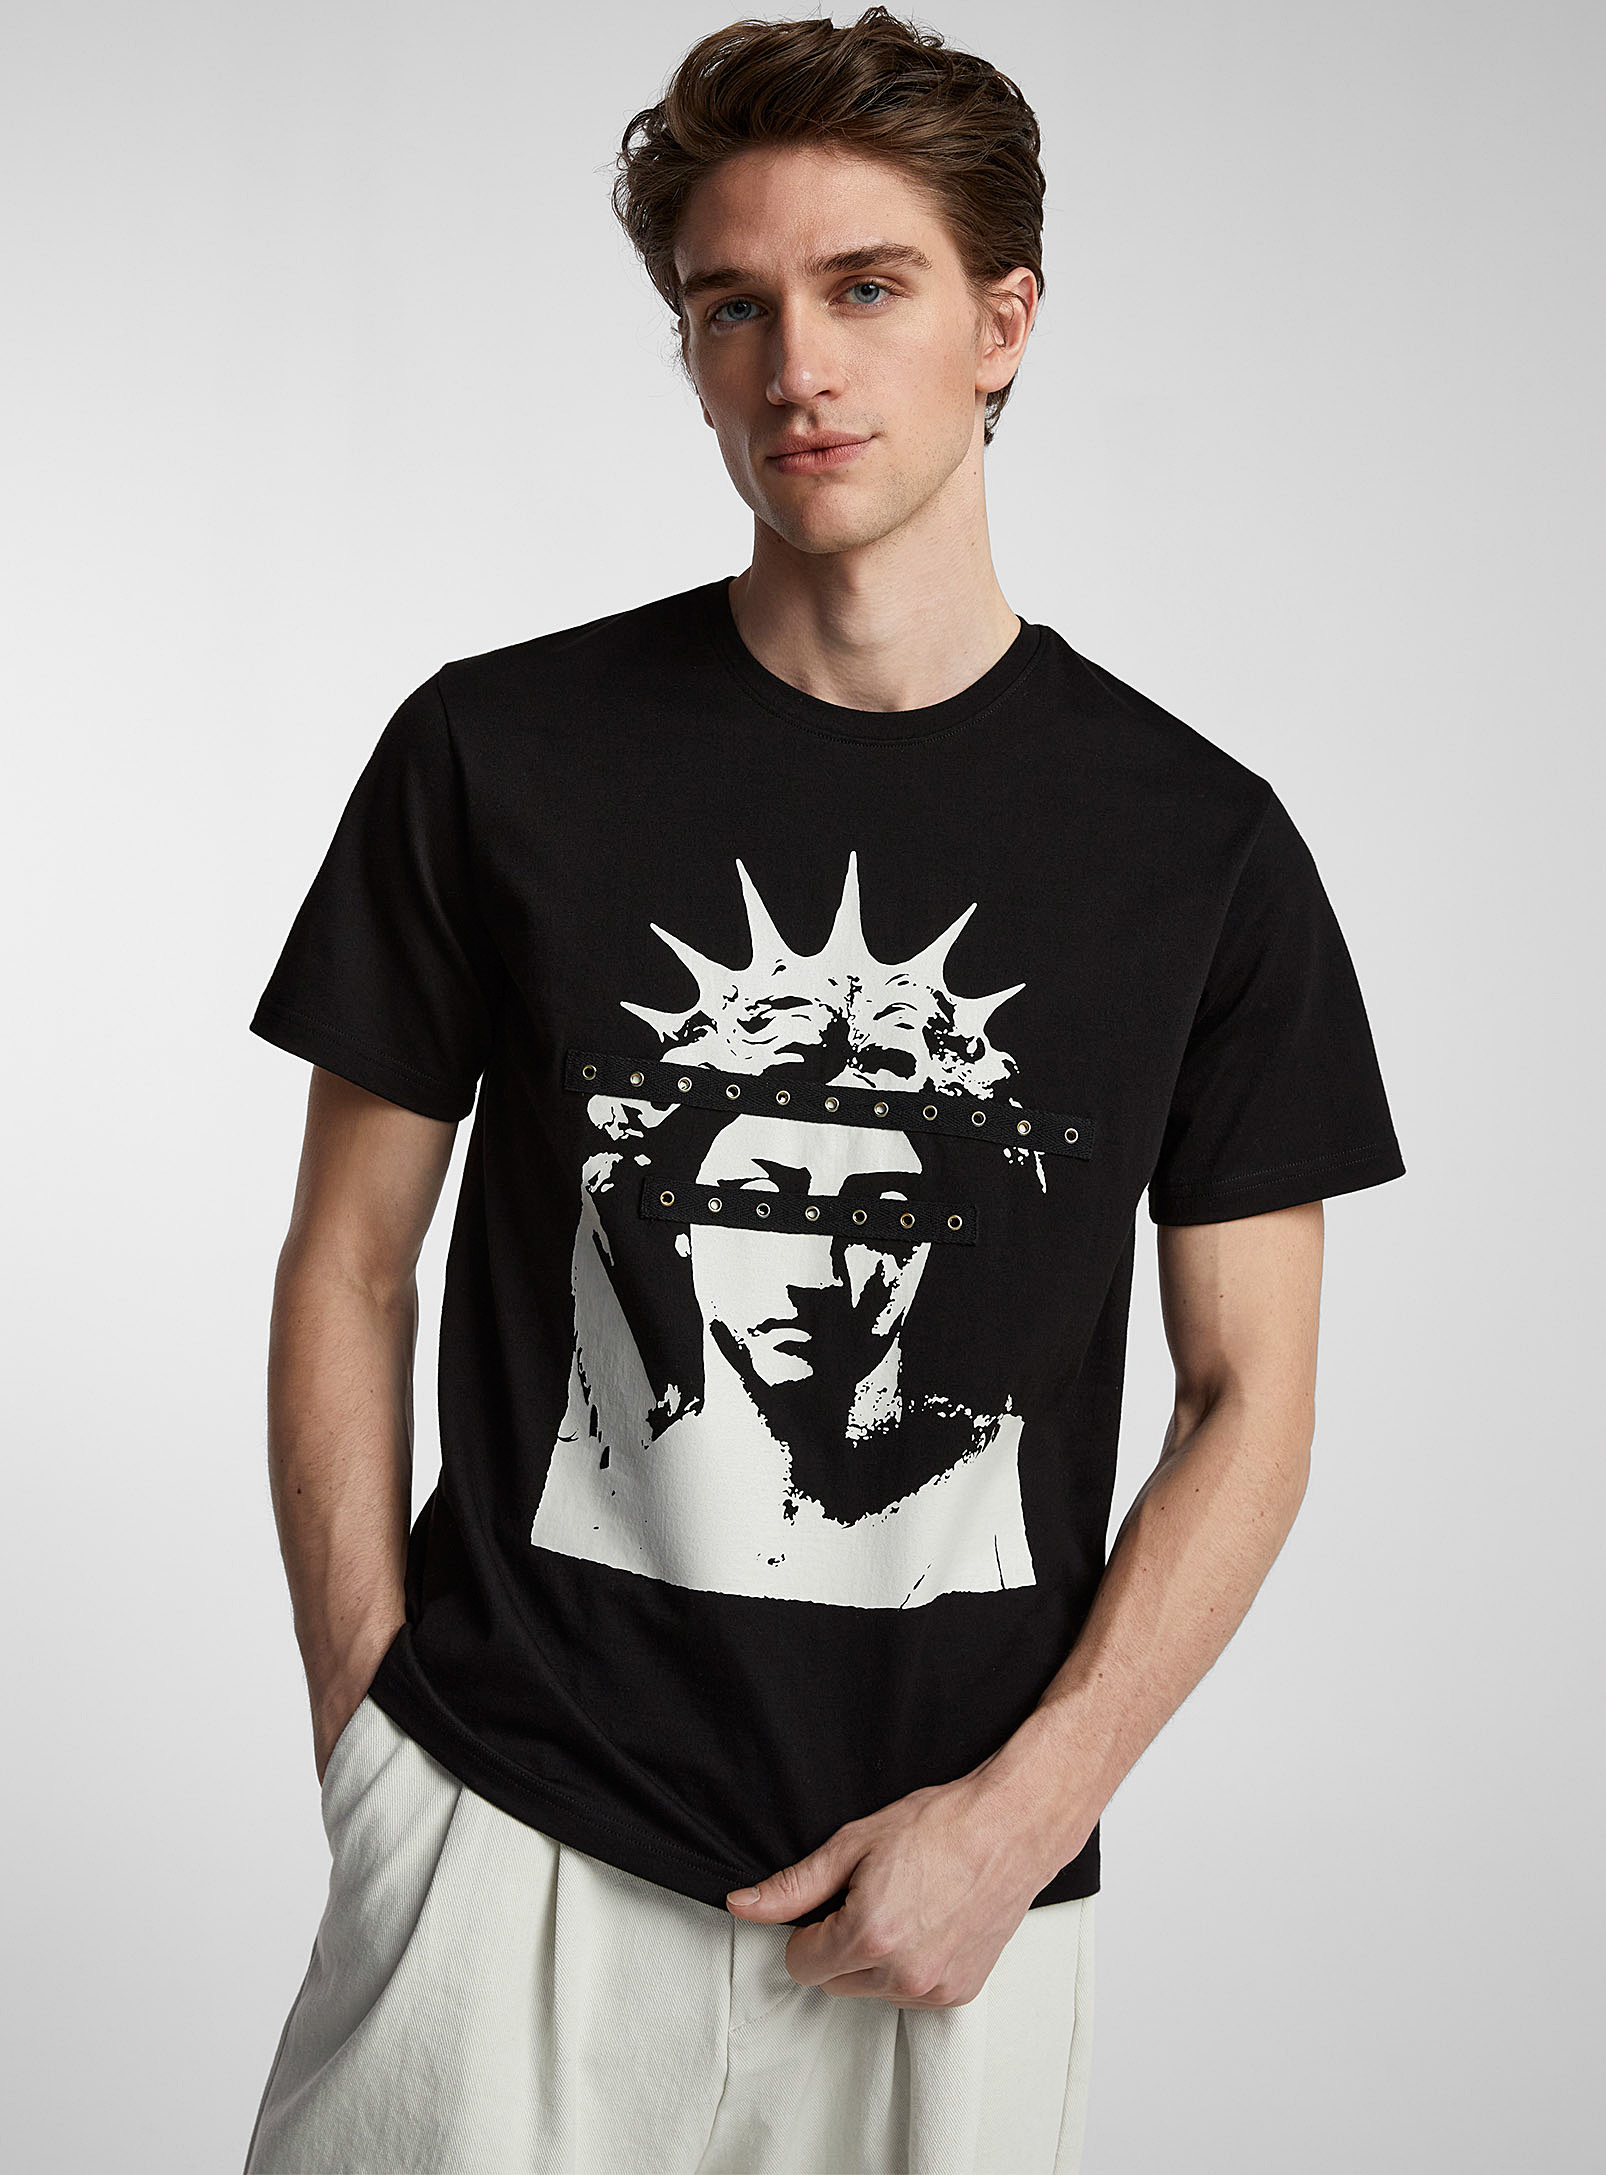 Tee Library Statue Of Liberty T-shirt In Black